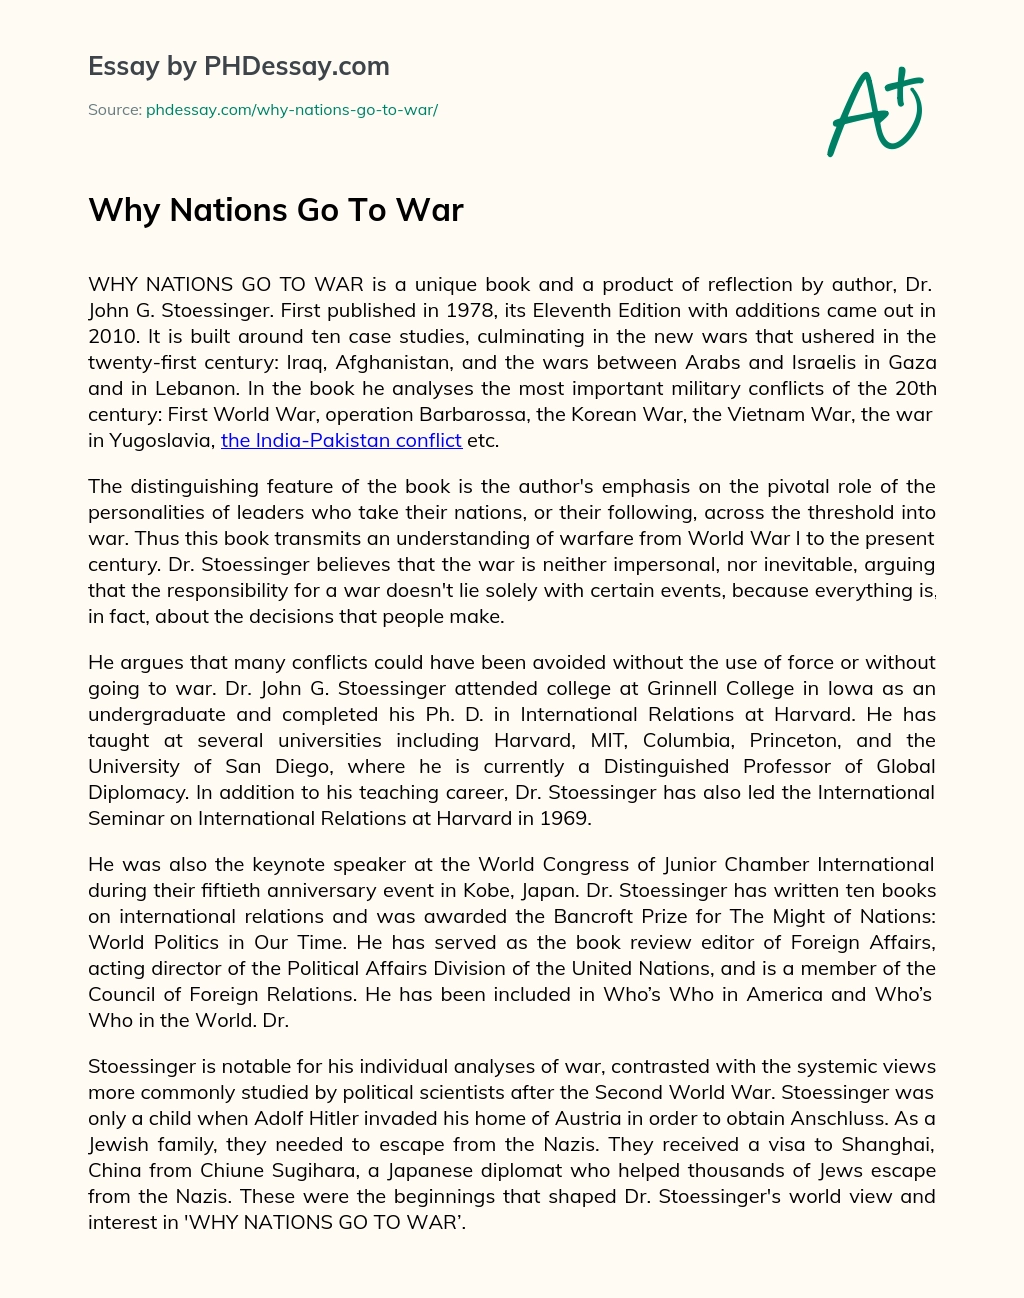 Why Nations Go To War essay